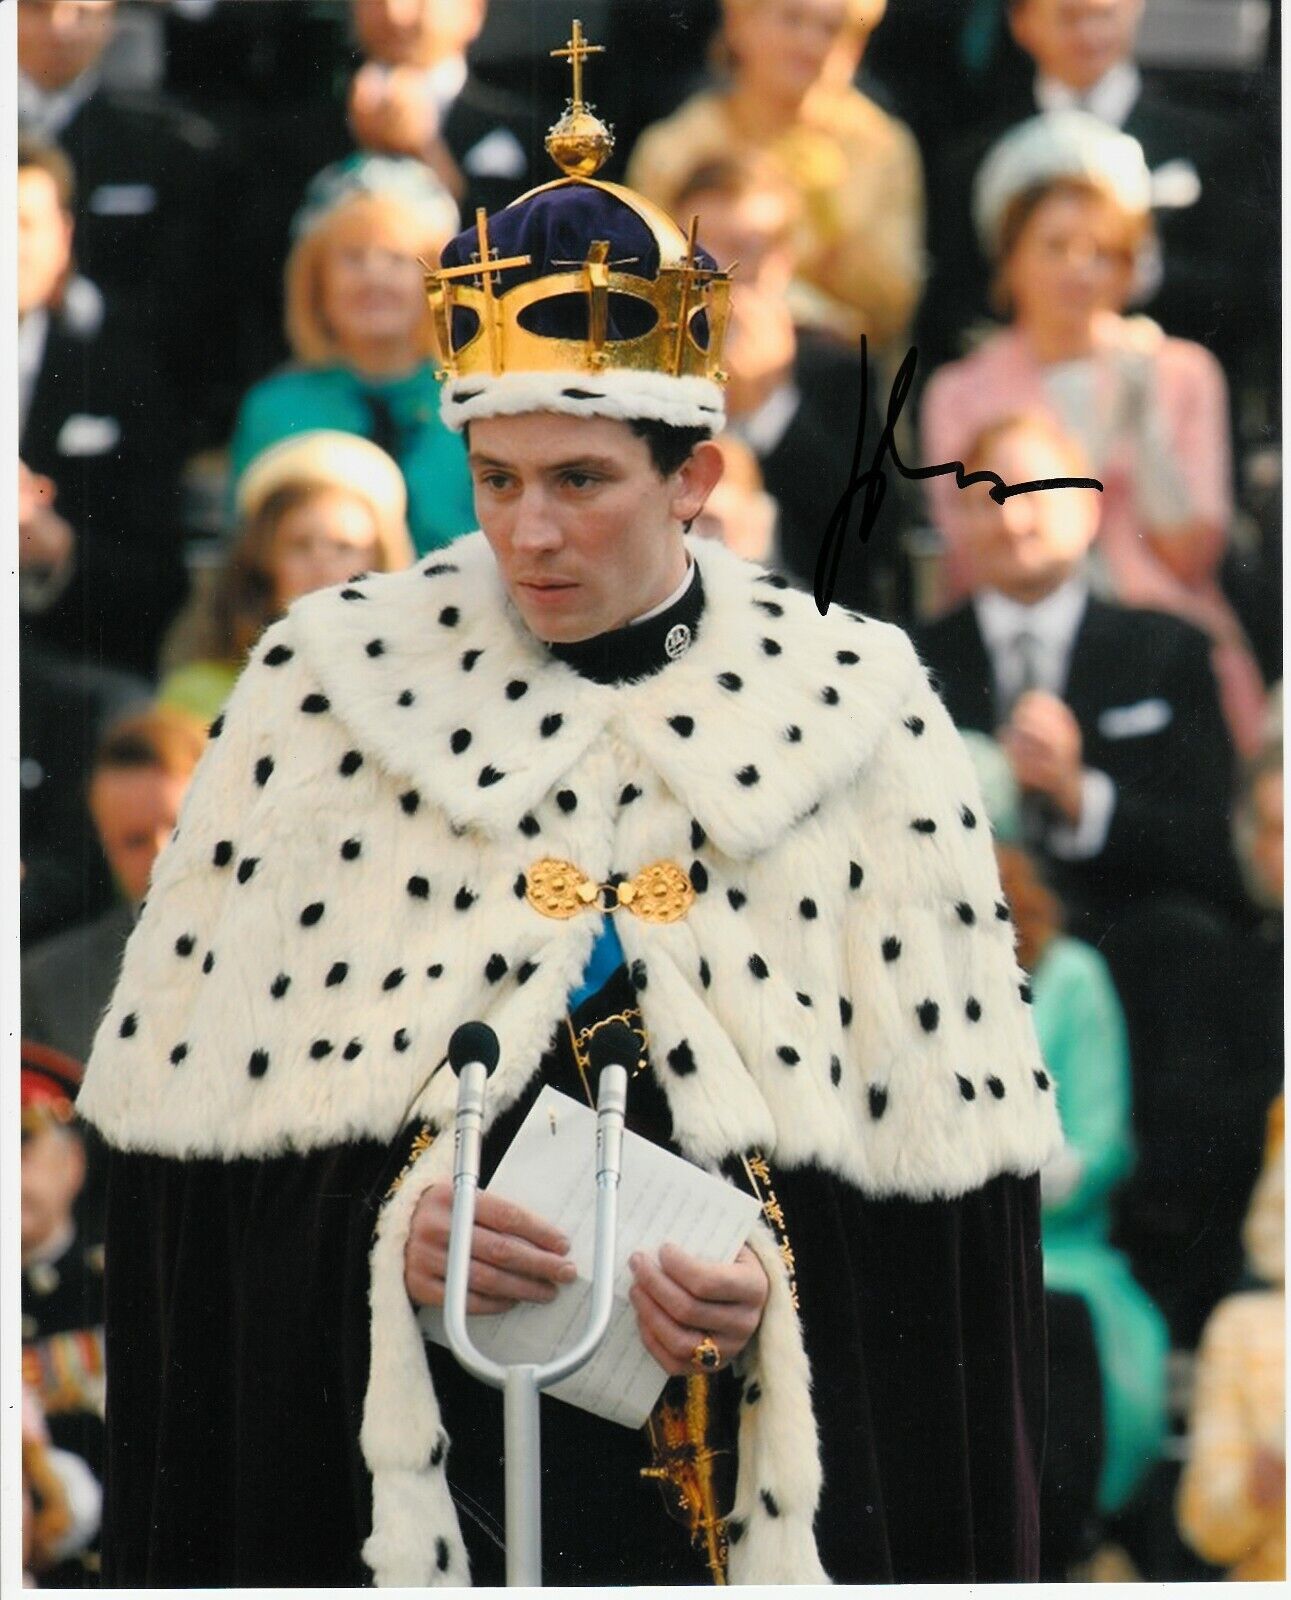 JOSH O'CONNOR SIGNED THE CROWN PHOTO  (2)